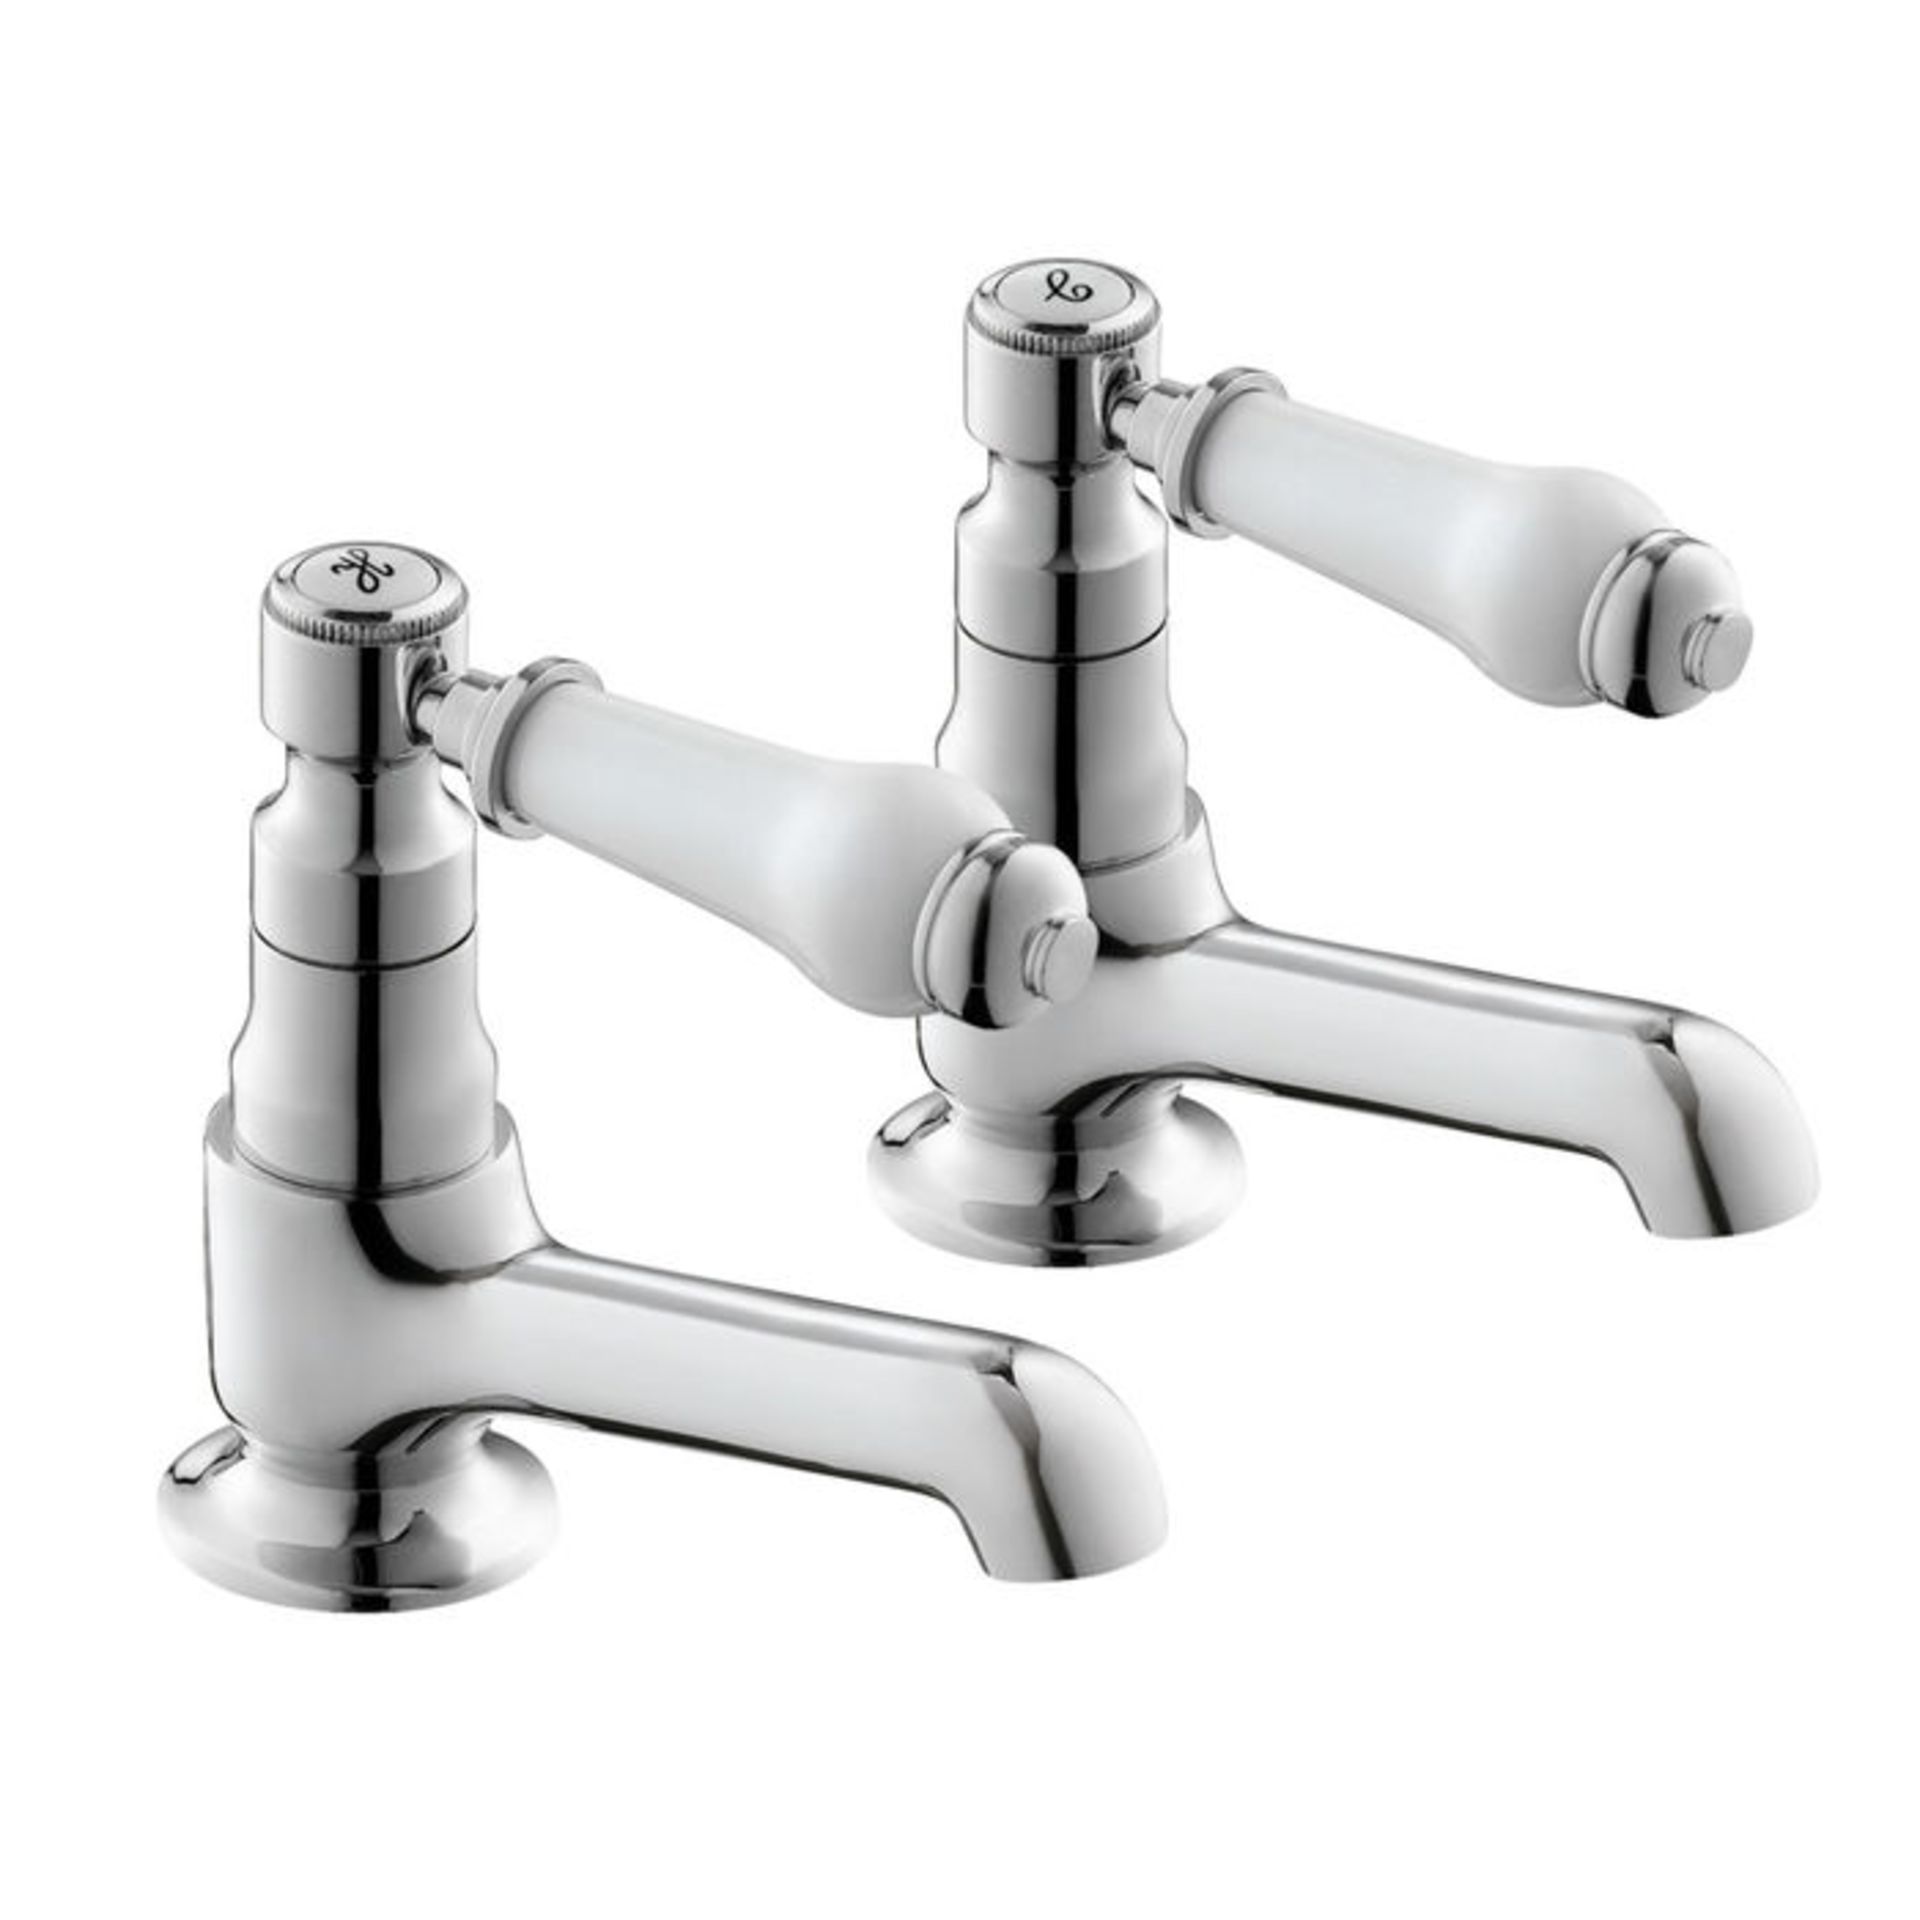 (P45) Regal Twin Hot & Cold Traditional Chrome Lever Bath Tub Taps Chrome Plated Solid Brass 1/4 - Image 4 of 4